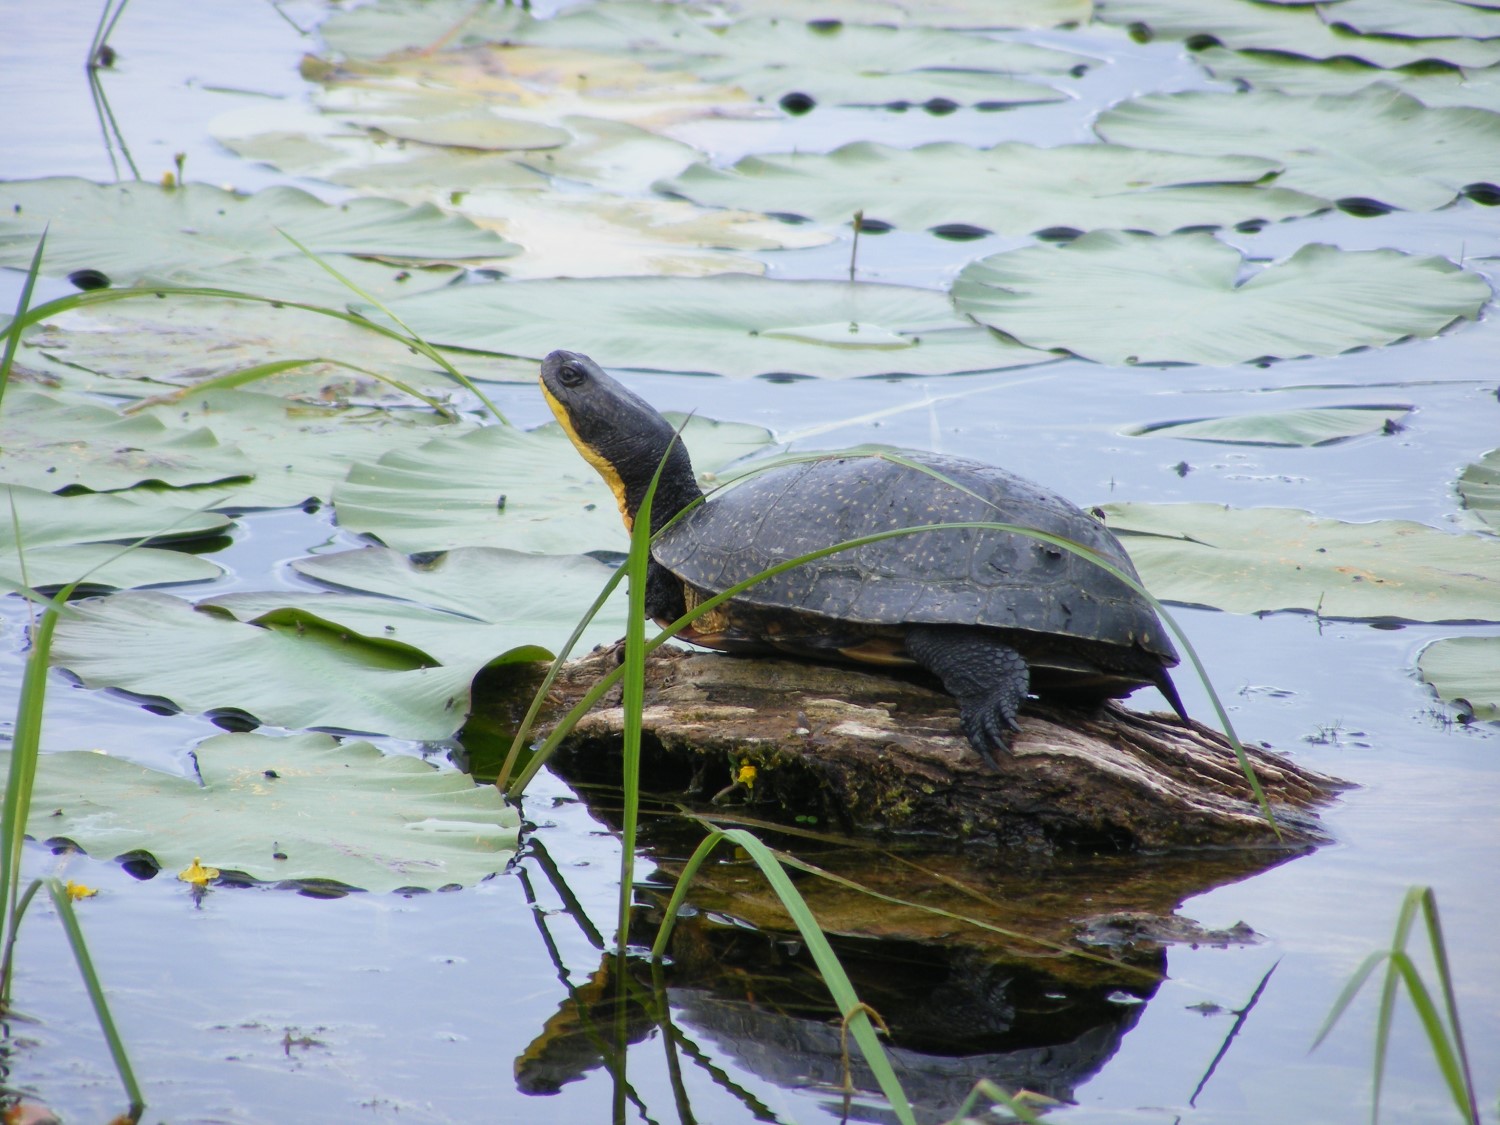 A turtle perched on a small rock that is surrounded by water, lily pads and reeds.